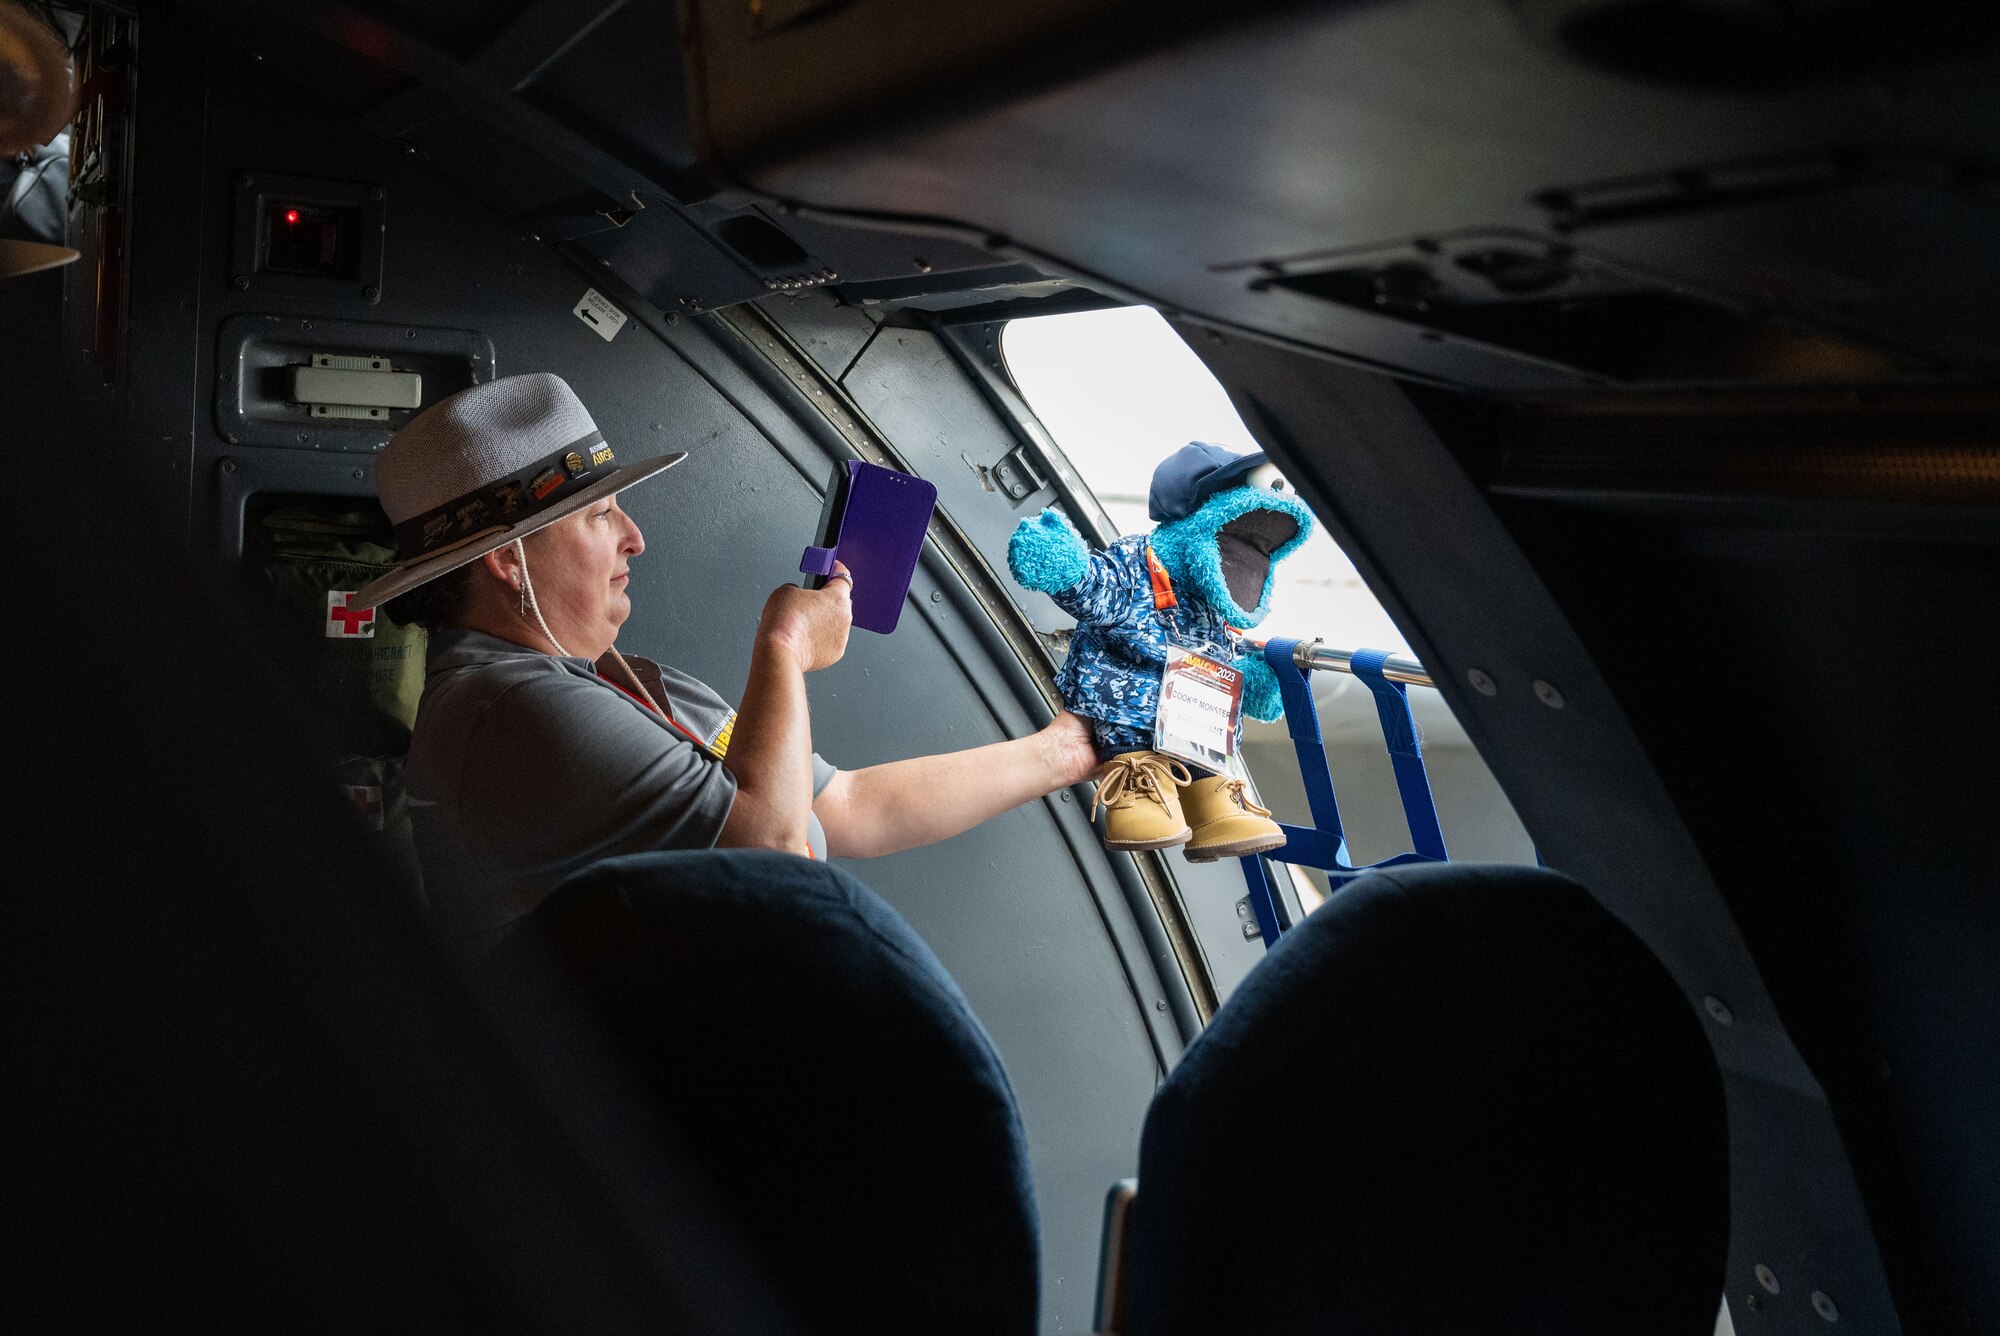 An event volunteer takes a photo of Cookie Monster—the event mascot—during a tour of the C-5 Galaxy during the 2023 Australian International Airshow and Aerospace & Defence Exposition—AVALON 23—at Avalon International Airport, March 1, 2023. AVALON 23 is the premier aerospace exhibition—airshow and tradeshow—in Australia and offers a venue to deepen our relationship with Australia and enhance regional security through expanded military-to-military cooperation with countries in the region. The C-5 Galaxy is a strategic transport aircraft and is the largest aircraft in the U.S. Air Force inventory. (U.S. Air Force photo by Tech. Sgt. Hailey Haux)